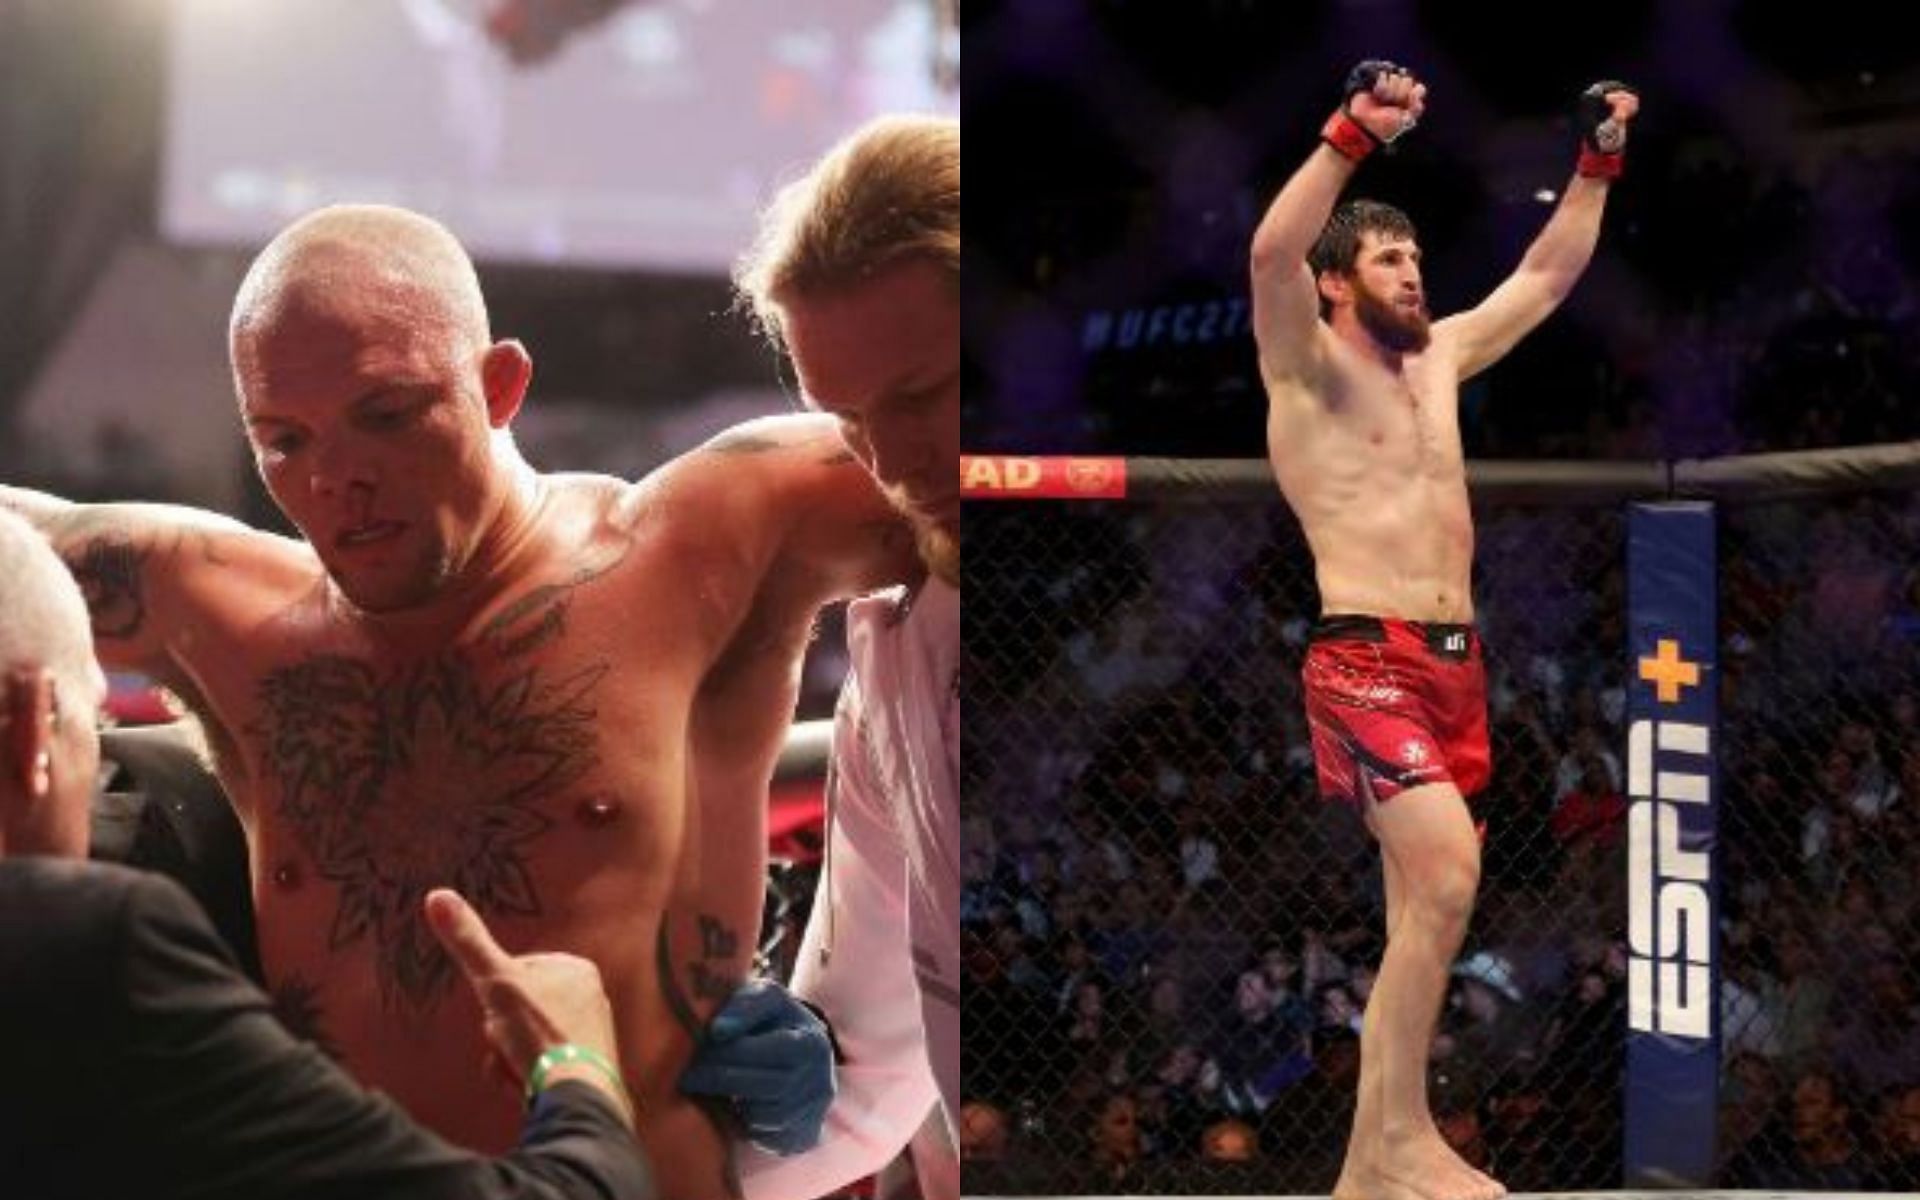 Anthony Smith being helped out of the cage after his fight with Magomed Ankalaev at UFC 277 (left), Ankalaev after his win (right)